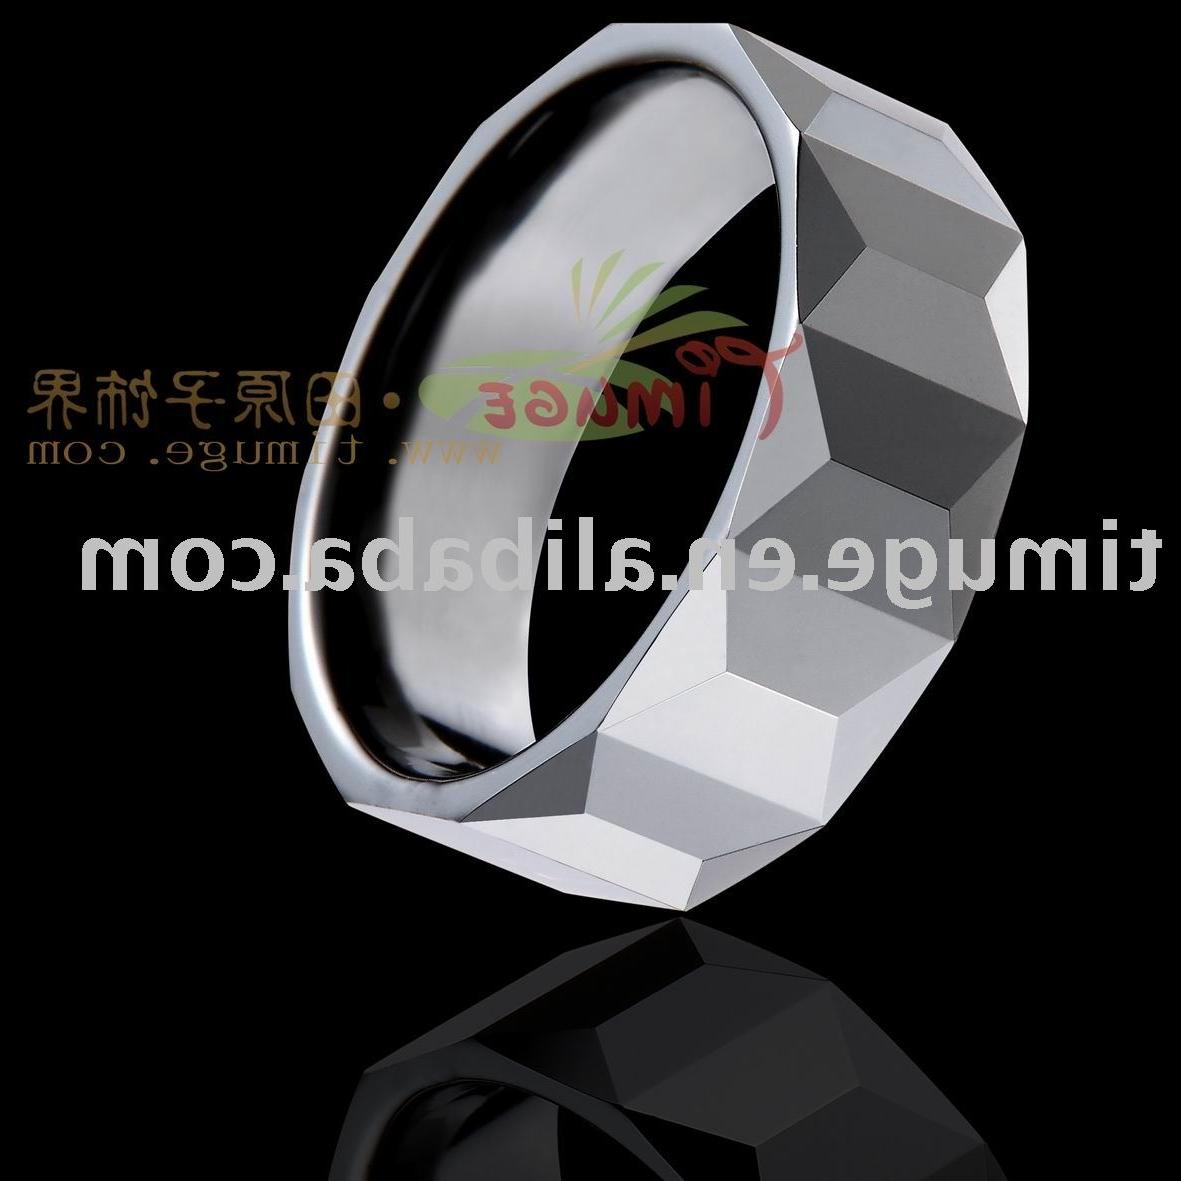 Tungsten Rings,wedding rings,finger rings. Inquire now